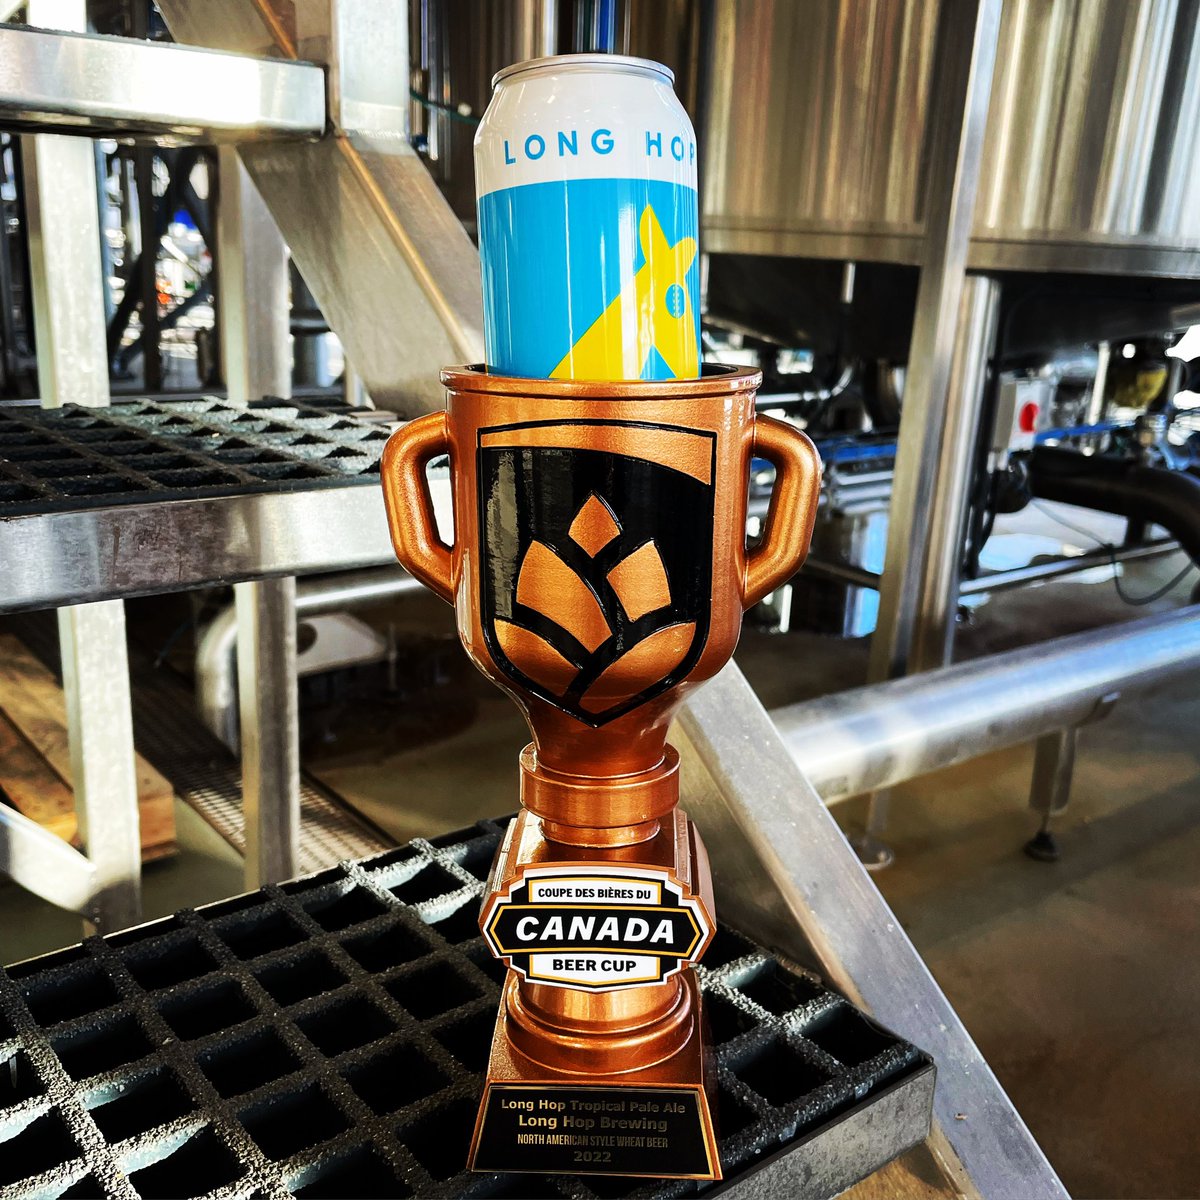 Finally an award we can drink from, thank you @canadabeercup 🦘🥉🦘